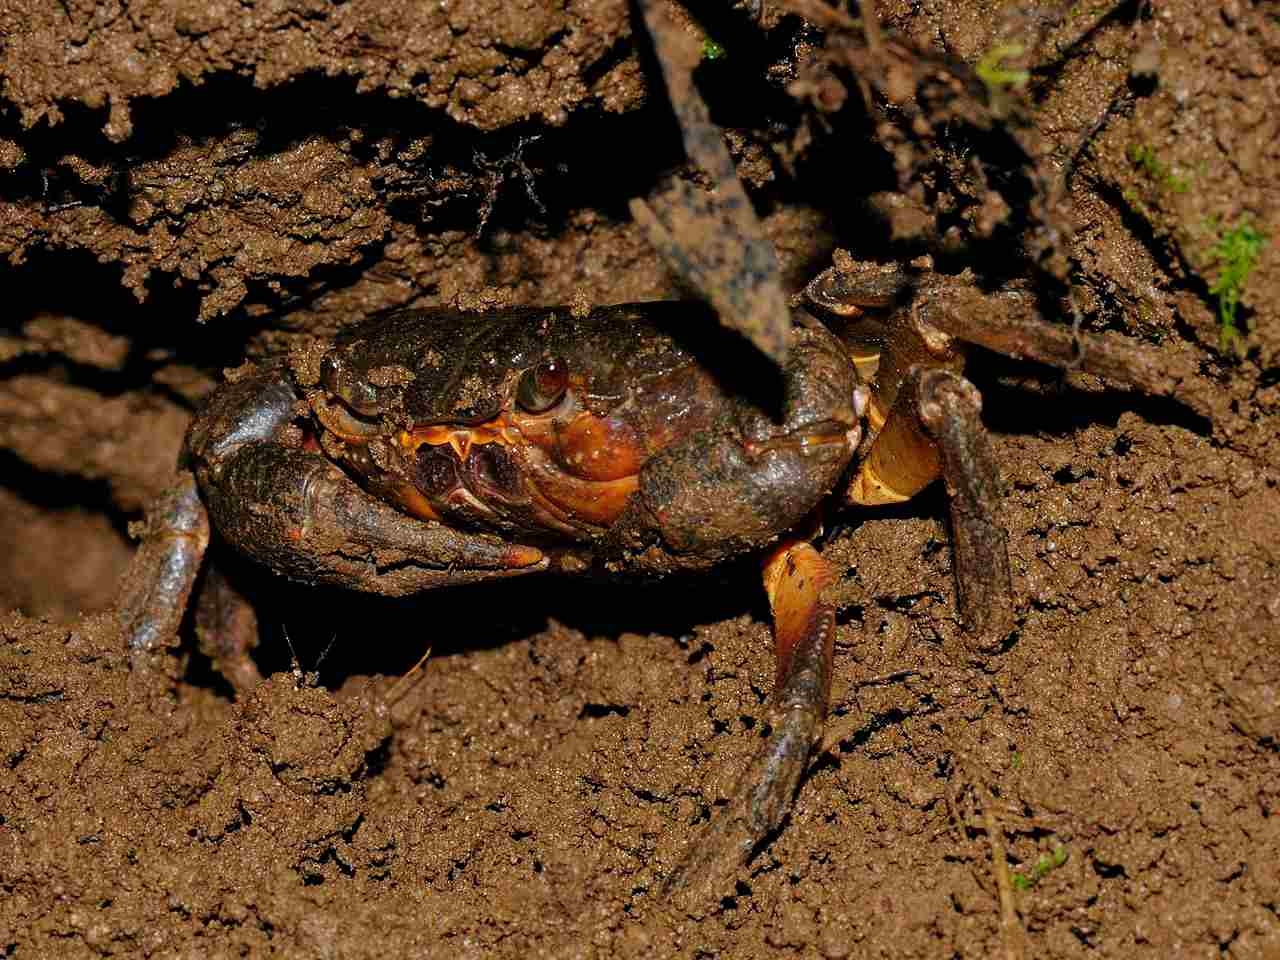 Are Crabs Consumers: Although Better Described as Scavengers, Crabs may be Called Decomposers Due to Detritivorous Feeding Behavior (Credit: Philipp Weigell 2011 .CC BY 3.0.)